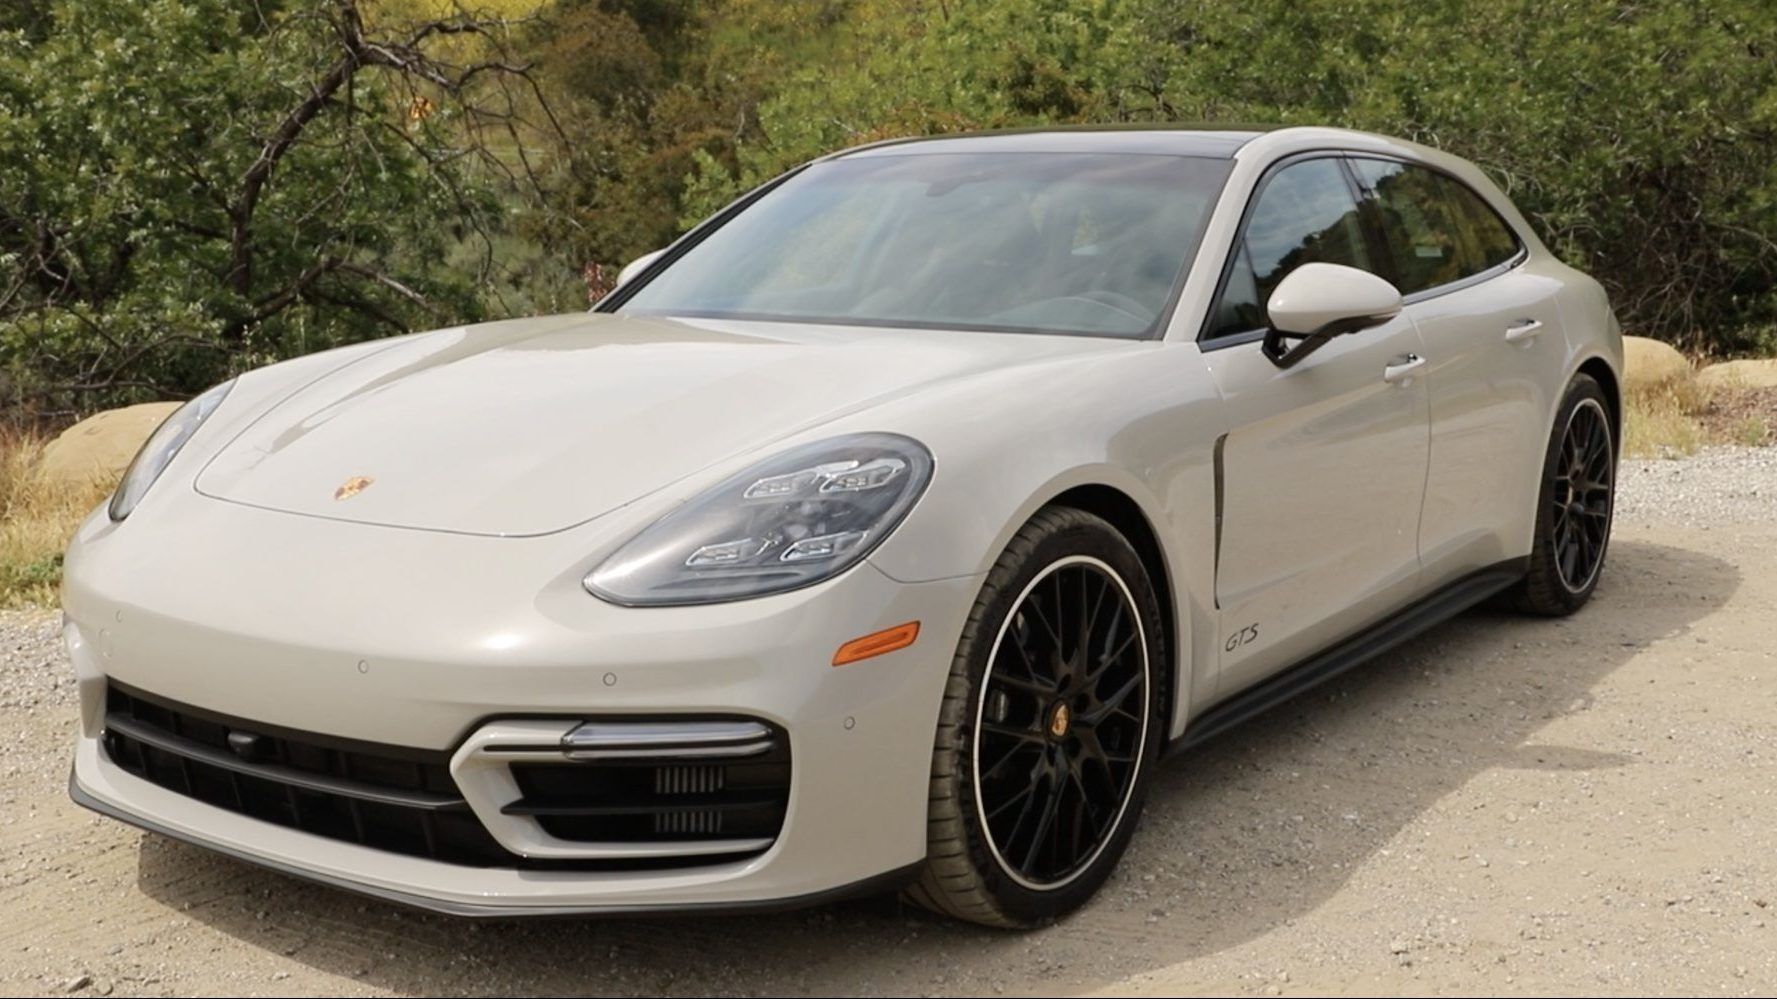 2023 Porsche Panamera - News, reviews, picture galleries and